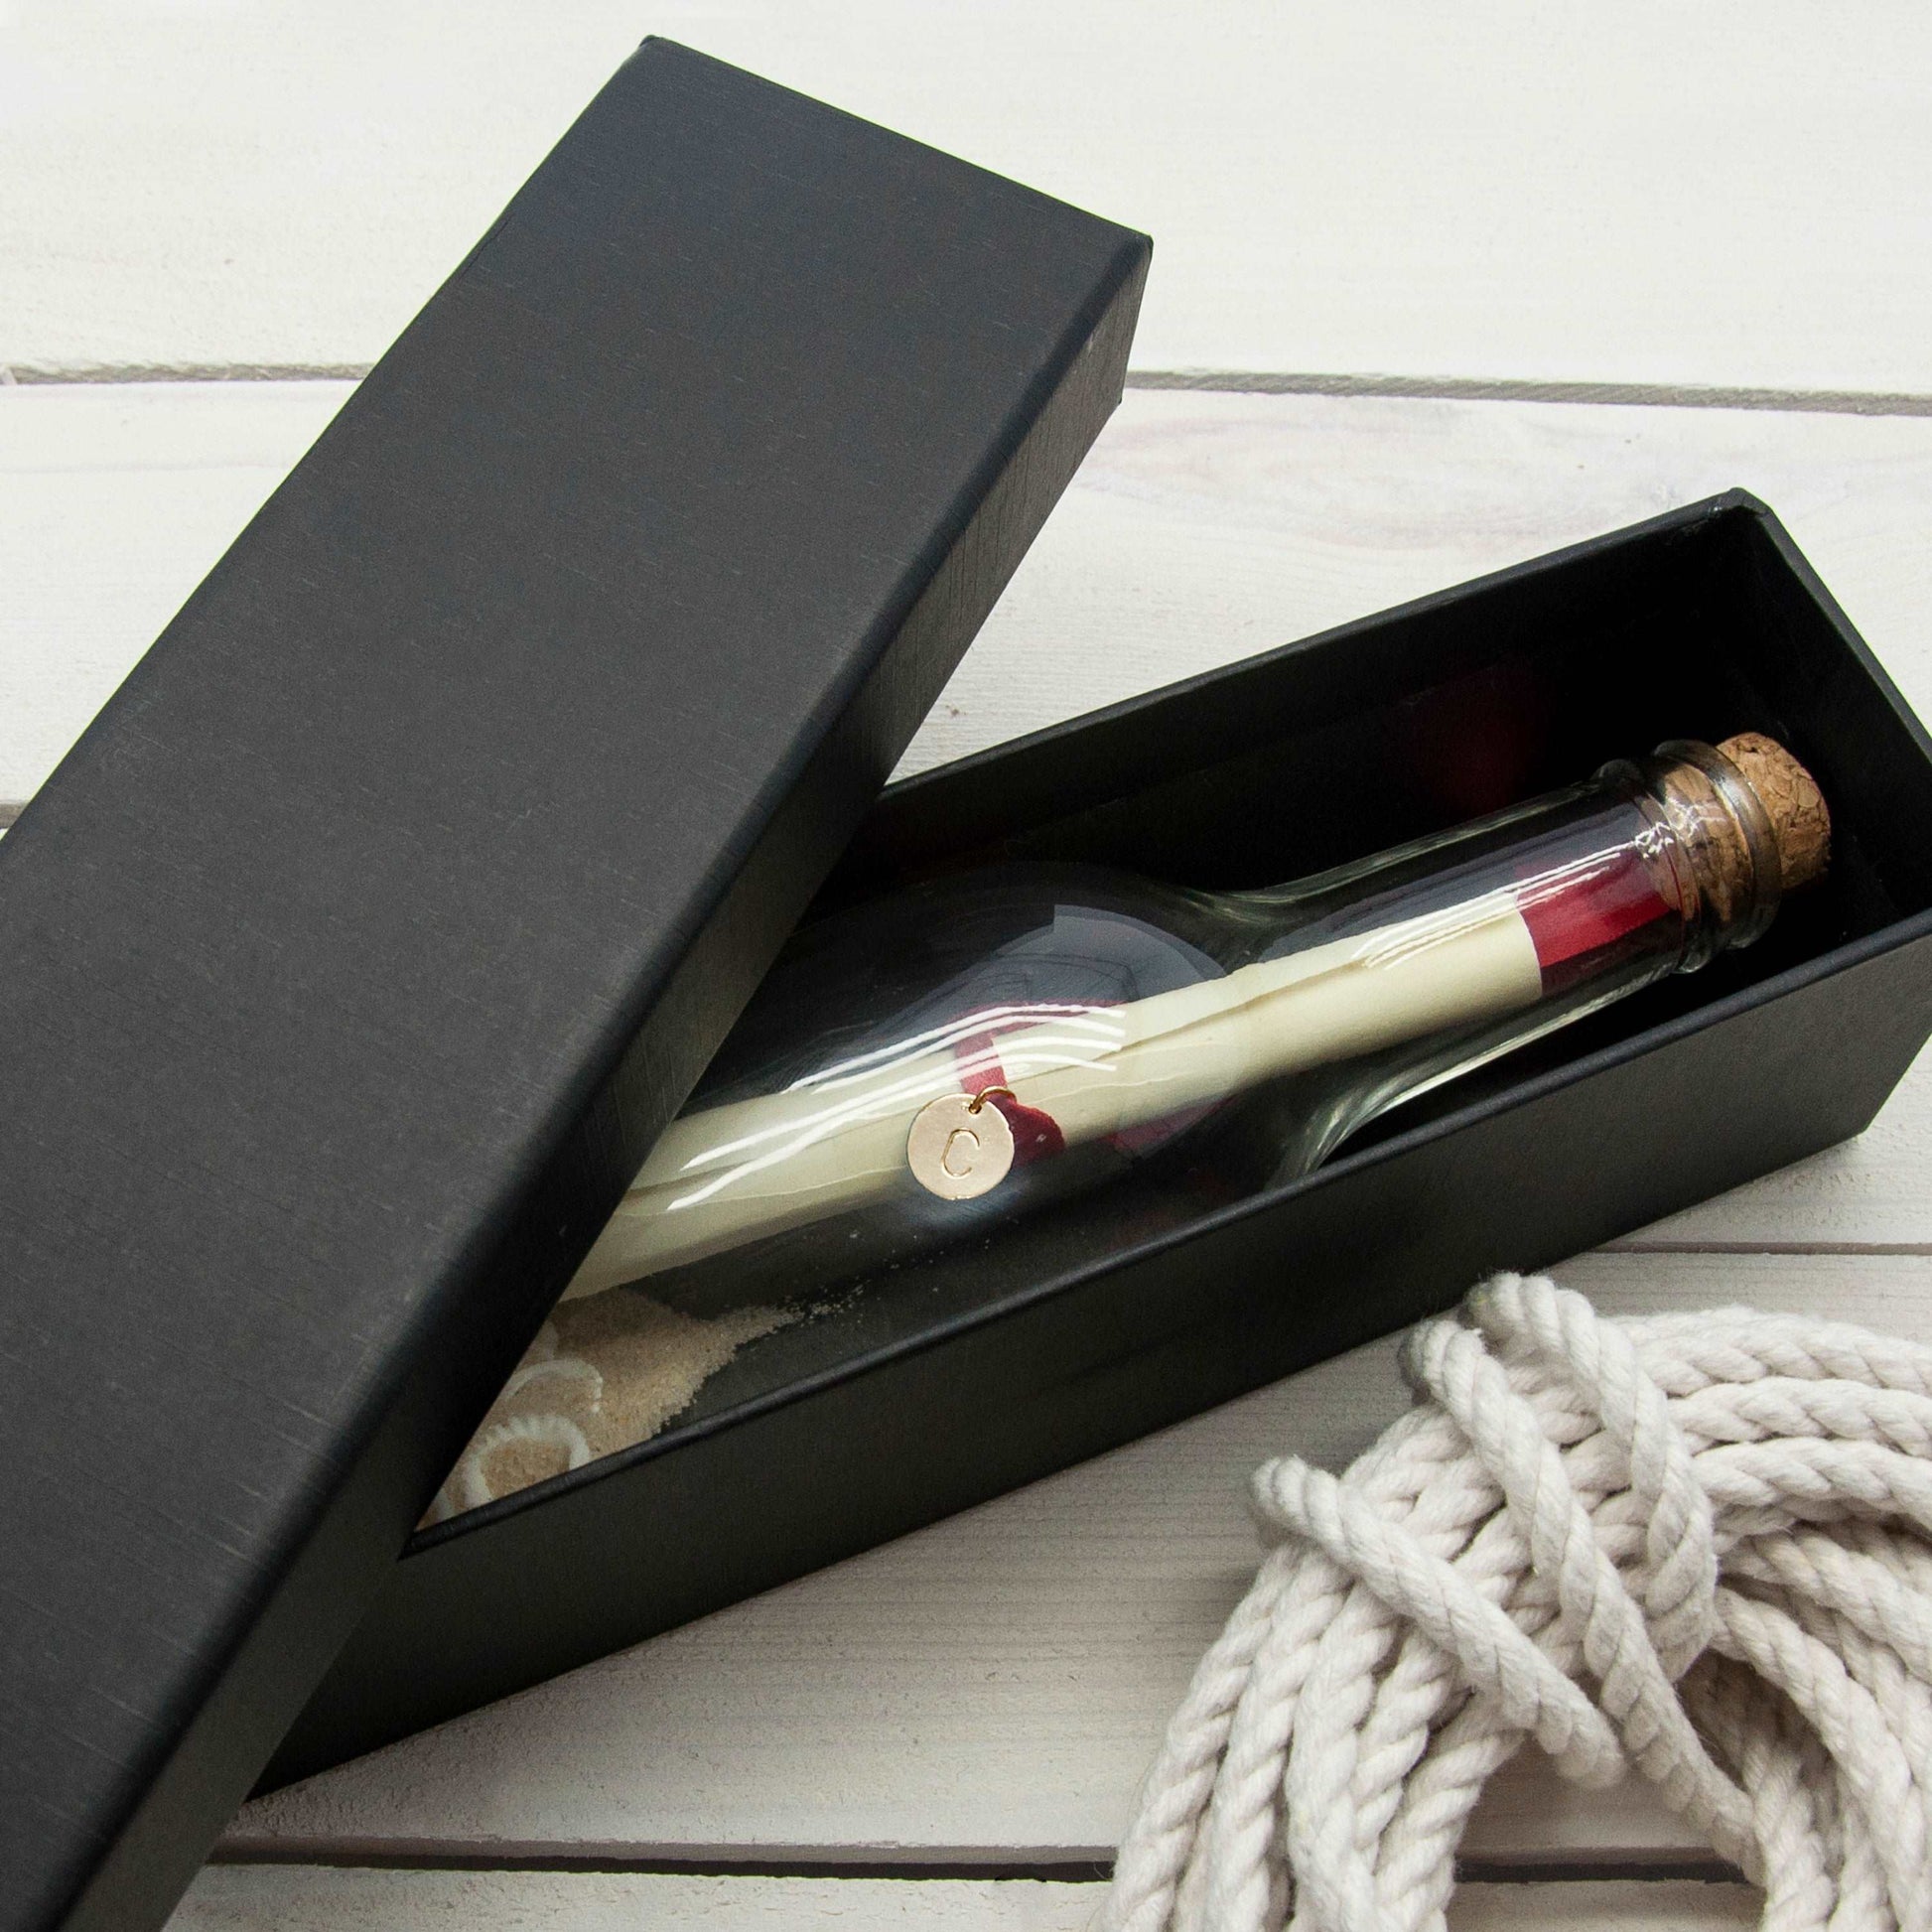 Personalized Keepsakes - Create Your Personalized Message In A Bottle 